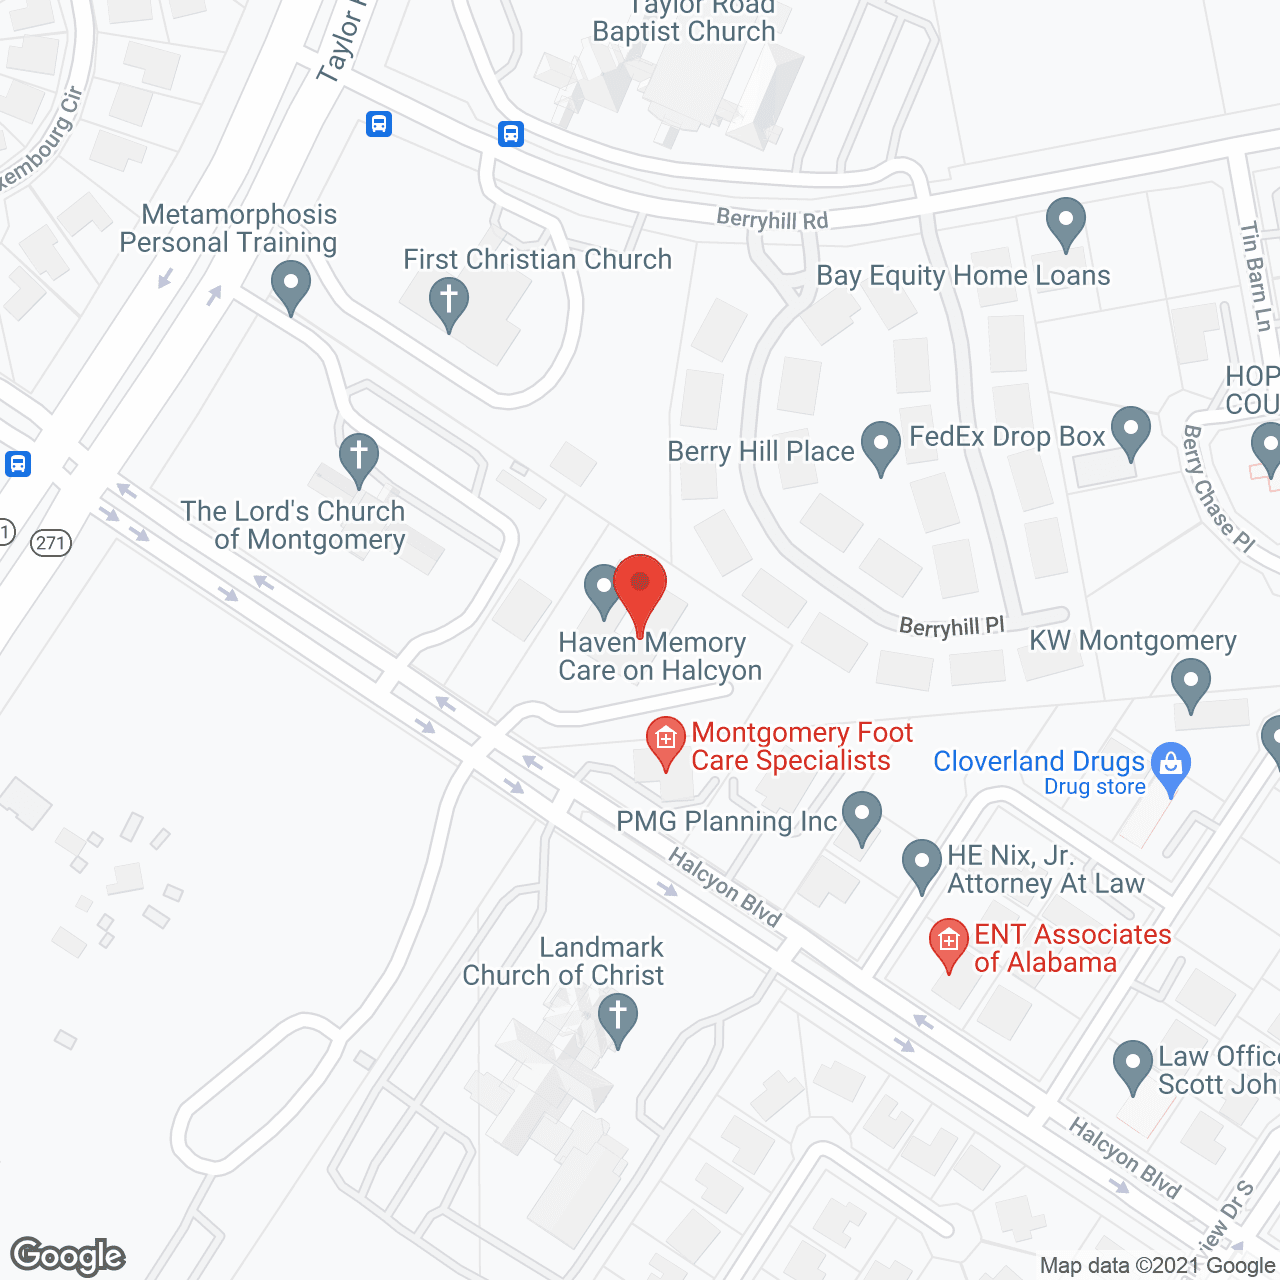 Haven Memory Care on Halcyon in google map